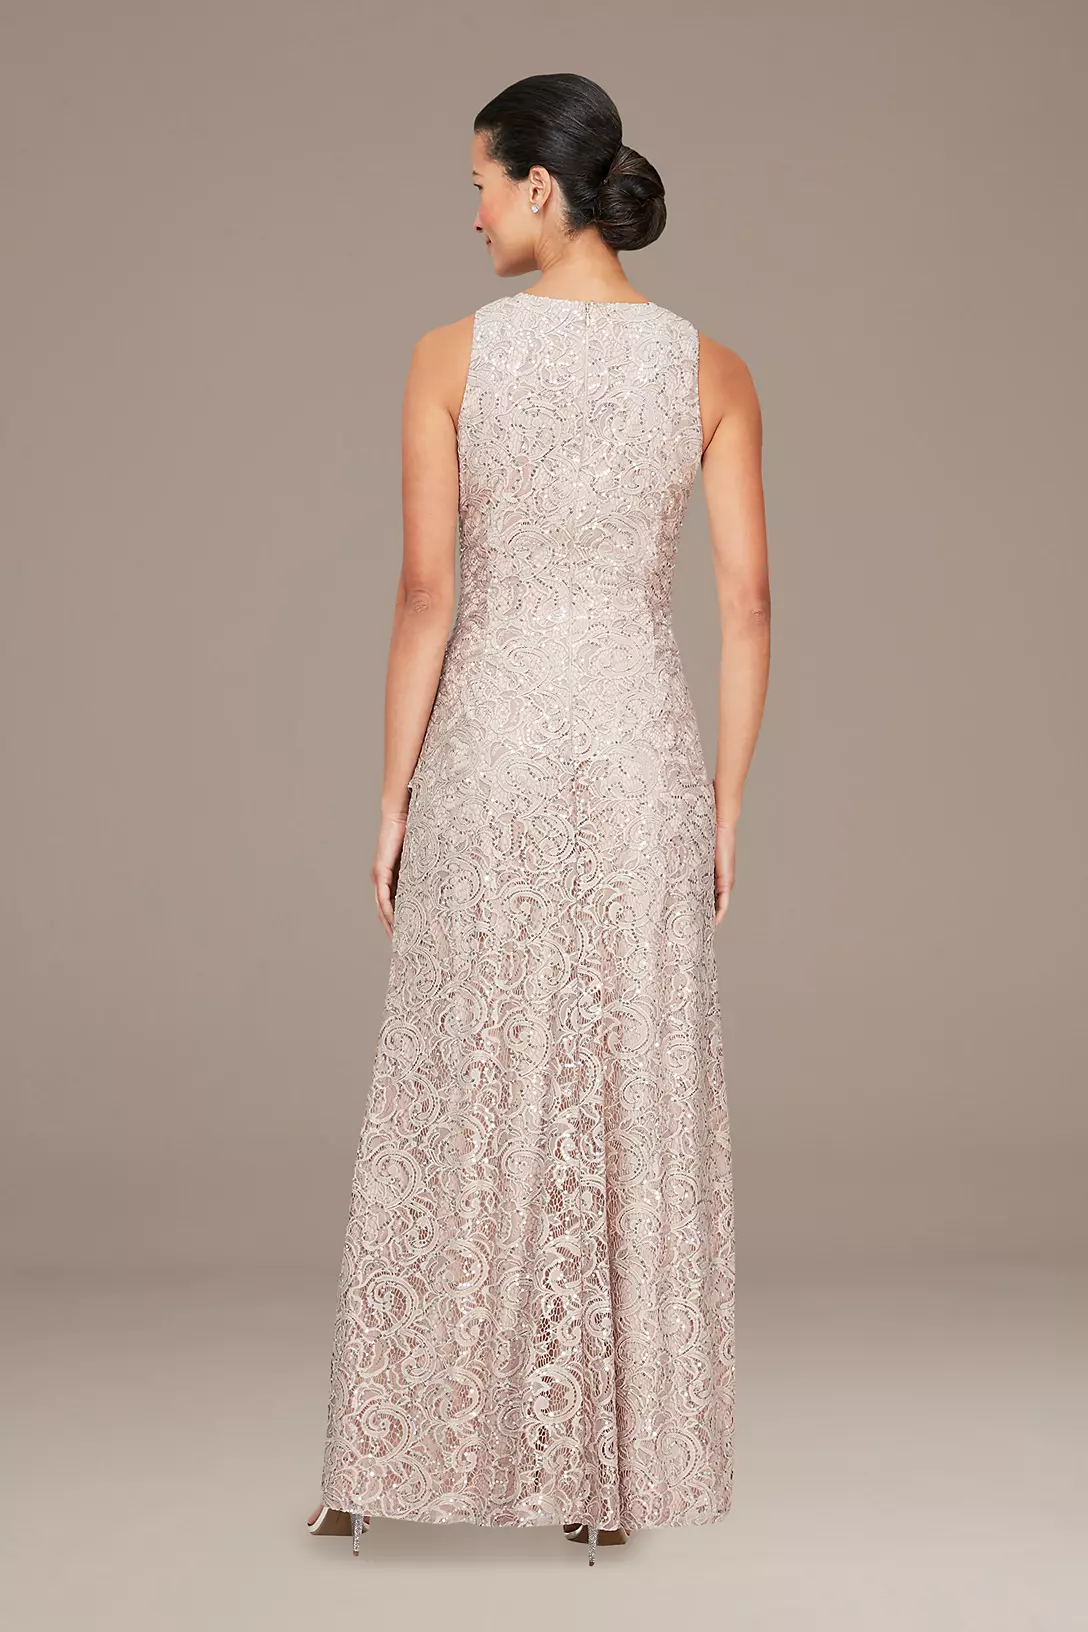 Glitter Lace Sheath Gown with Skirt Slit Image 2